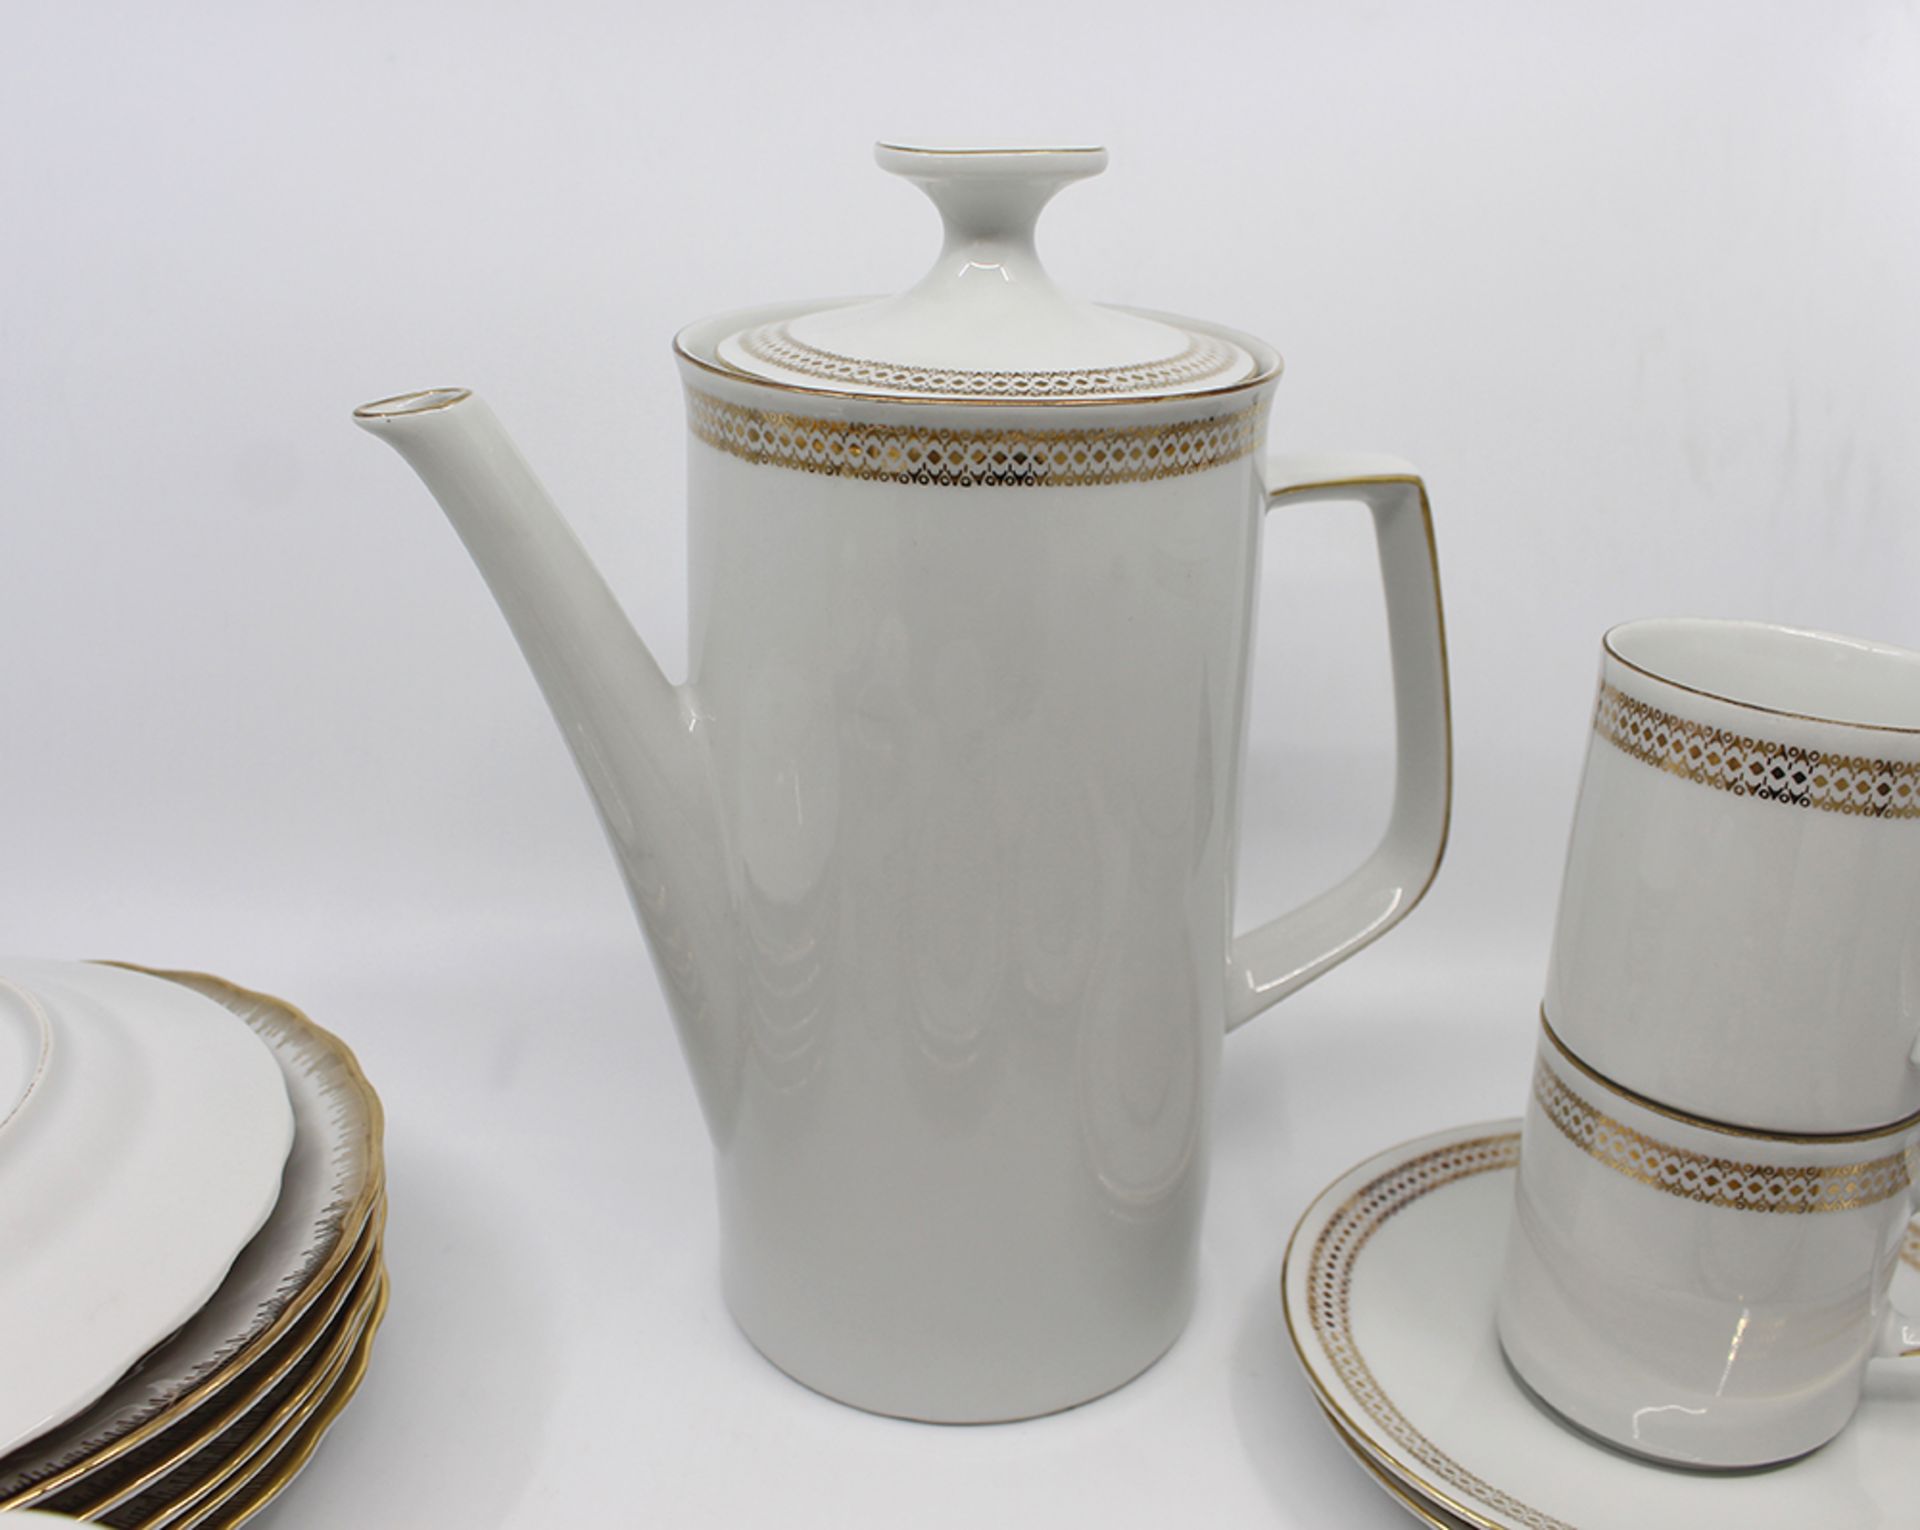 23 Piece Winterling Bavaria White & Gold Porcelain Coffee Service - Image 5 of 8